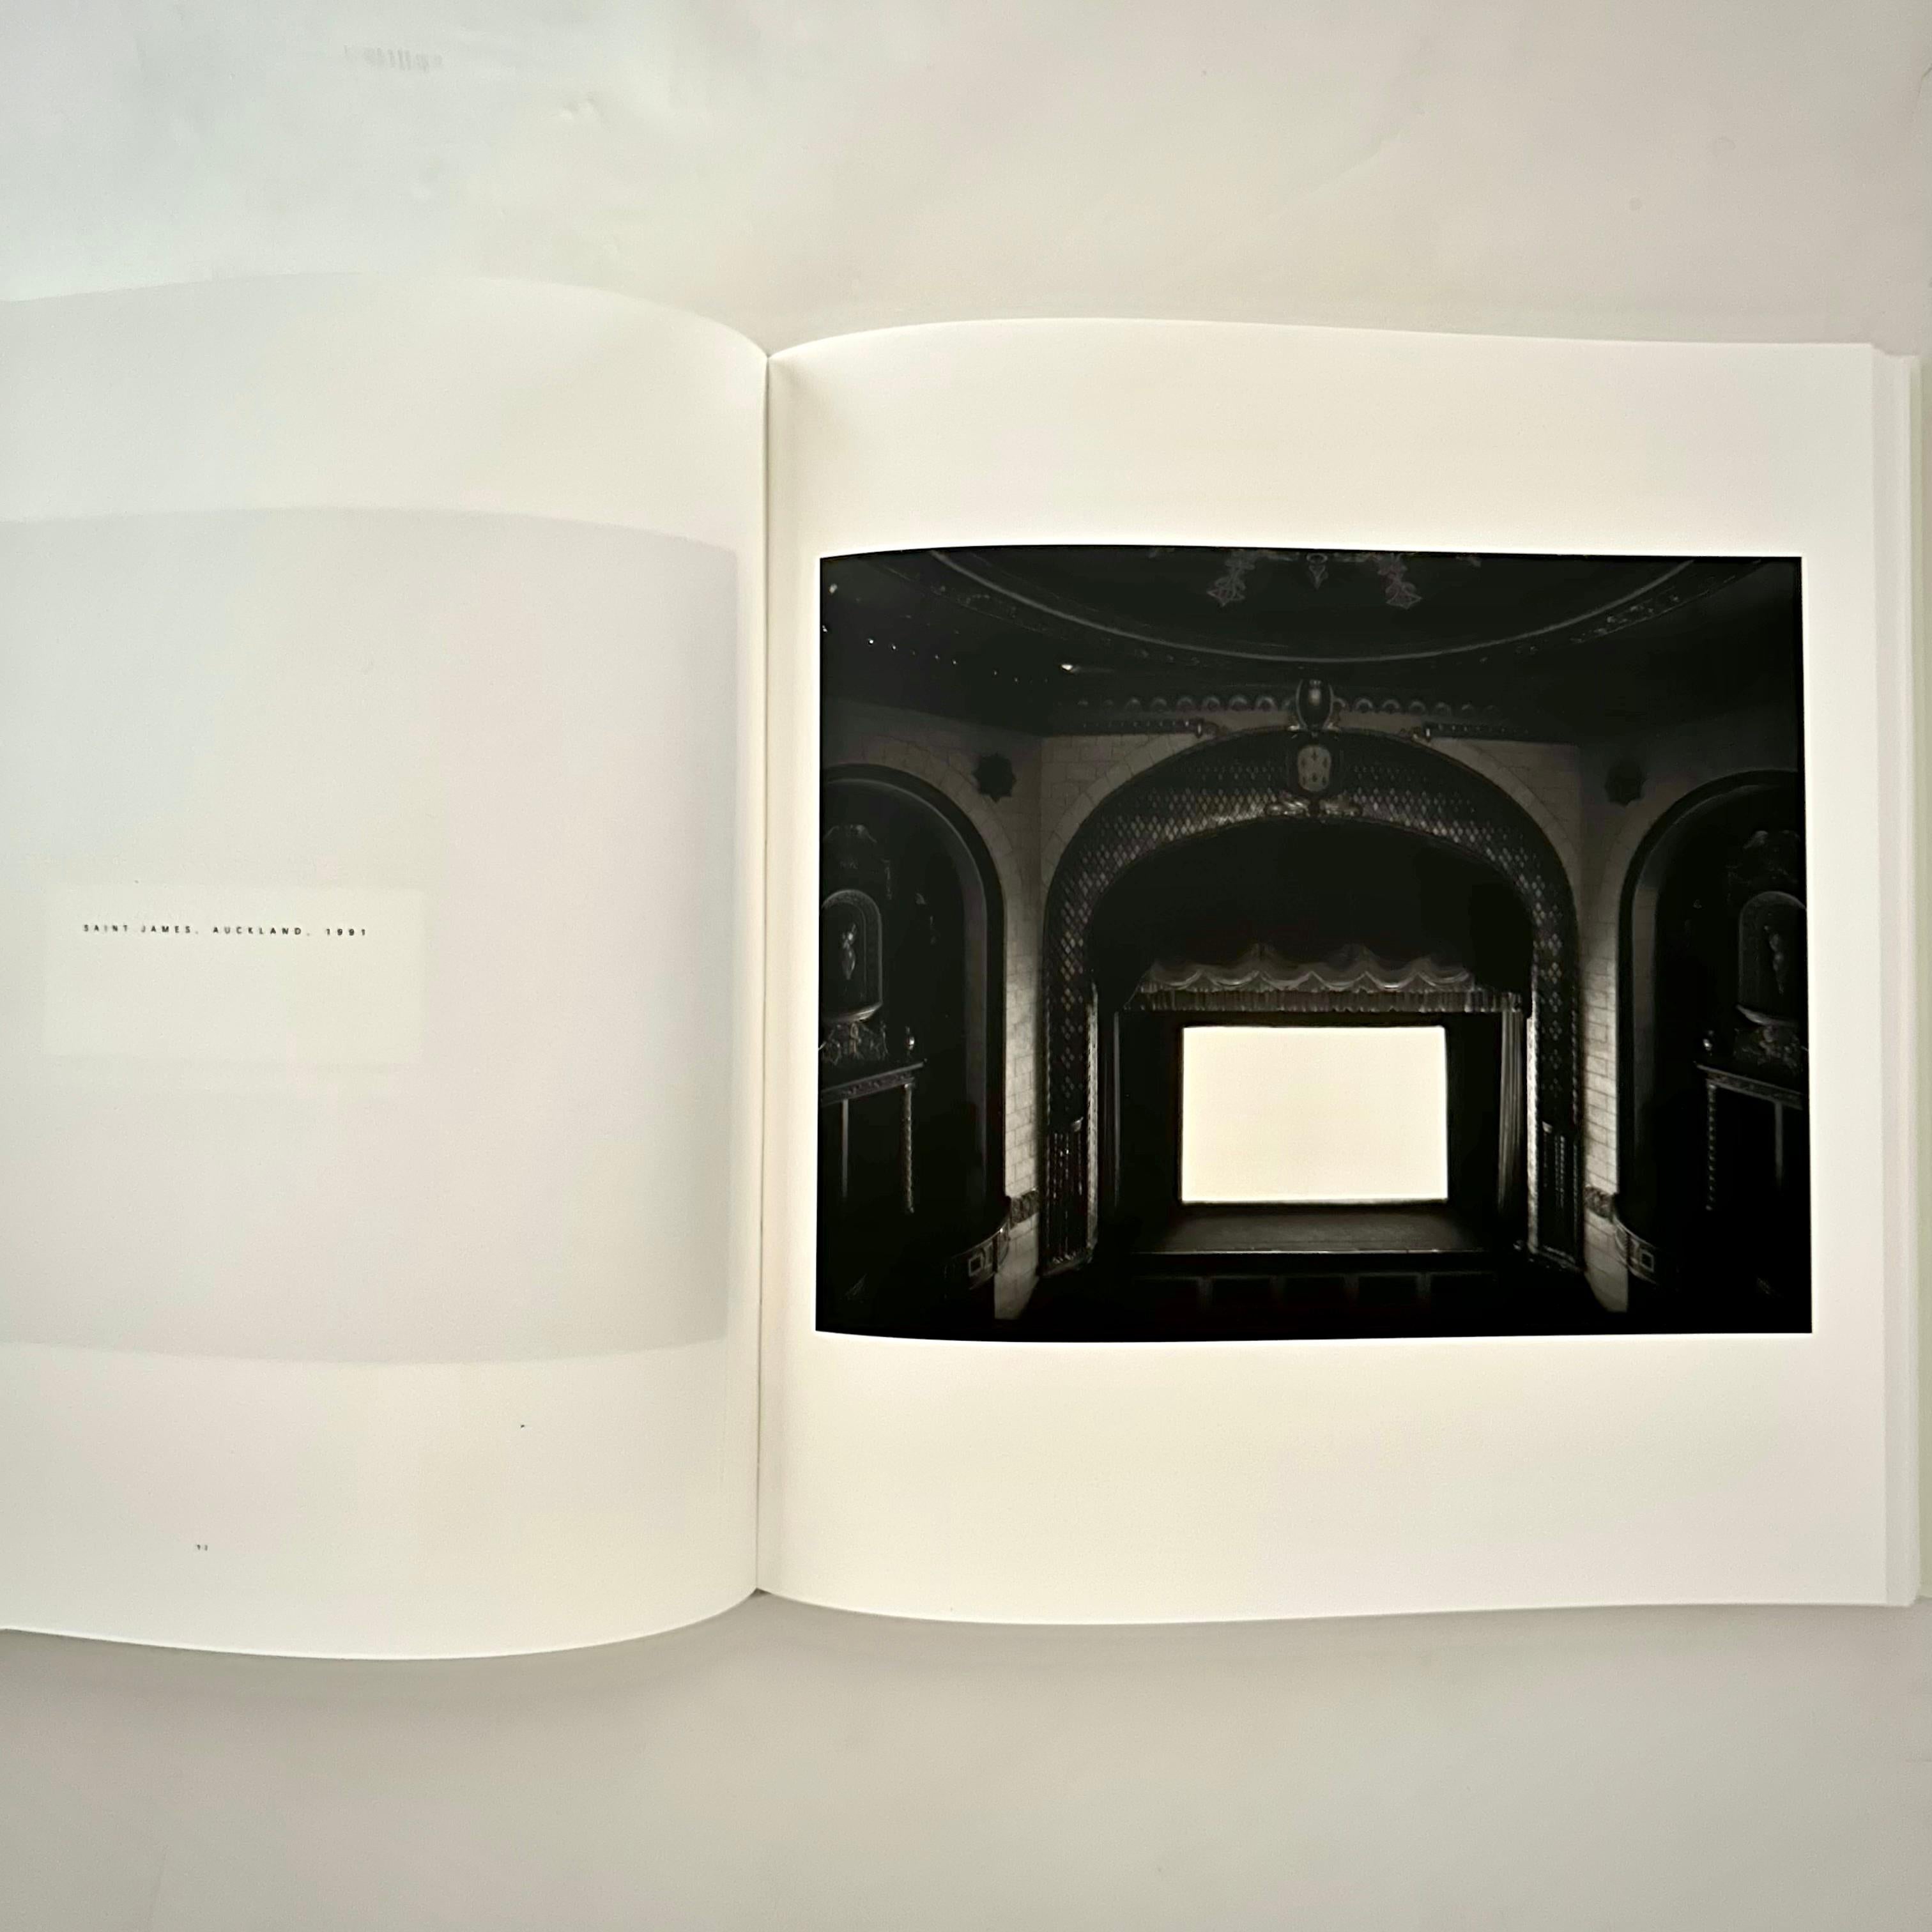 Hiroshi Sugimoto: Theaters - Hans Belting - 1st Edition, New York/ London, 2000 For Sale 1